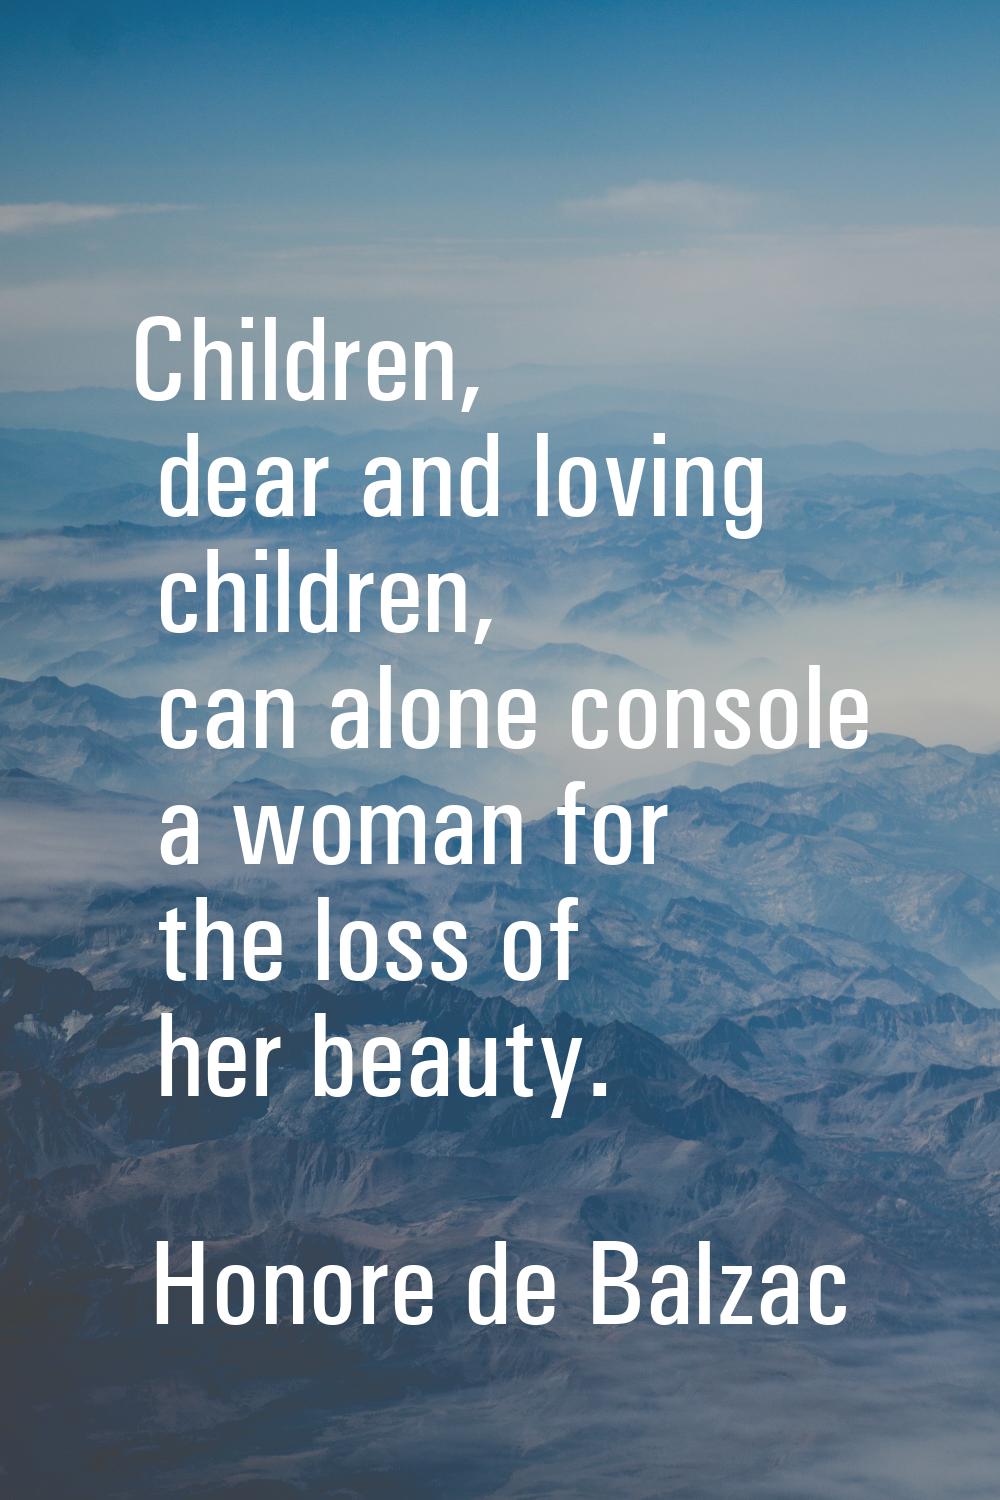 Children, dear and loving children, can alone console a woman for the loss of her beauty.